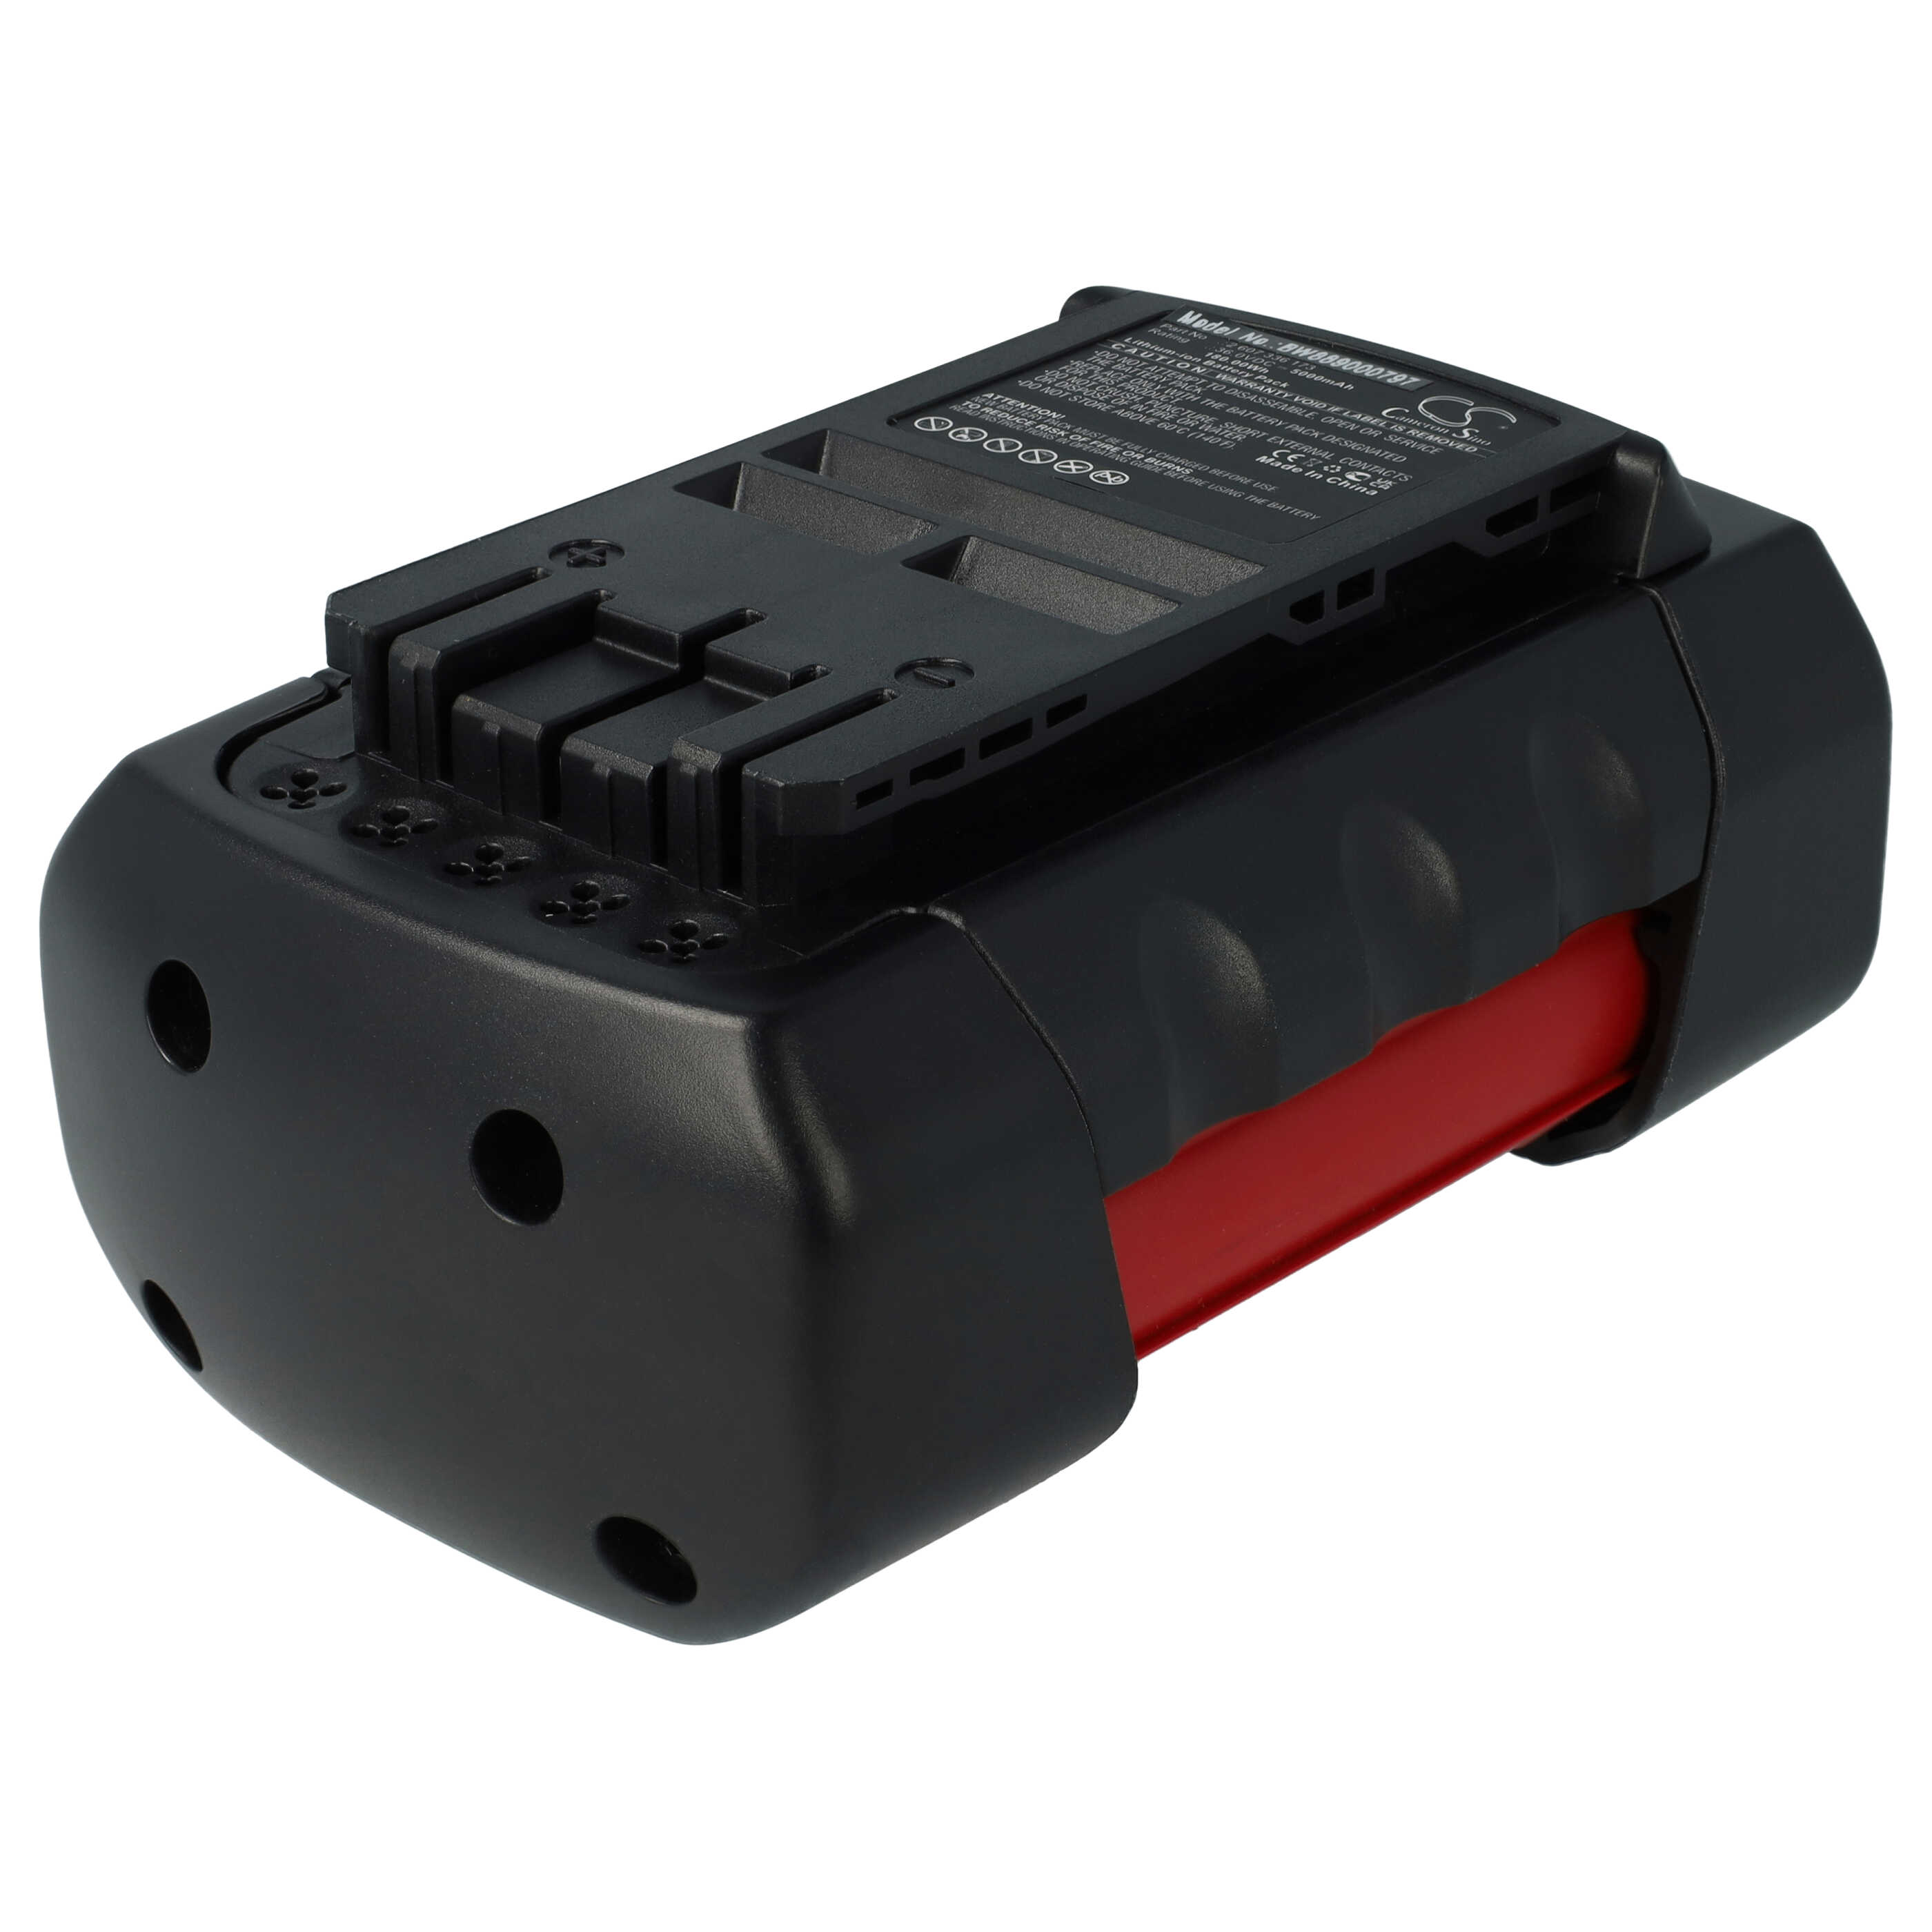 Lawnmower Battery Replacement for Bosch 2 607 336 173, 1600A0022N - 5000mAh 36V Li-Ion, black / red